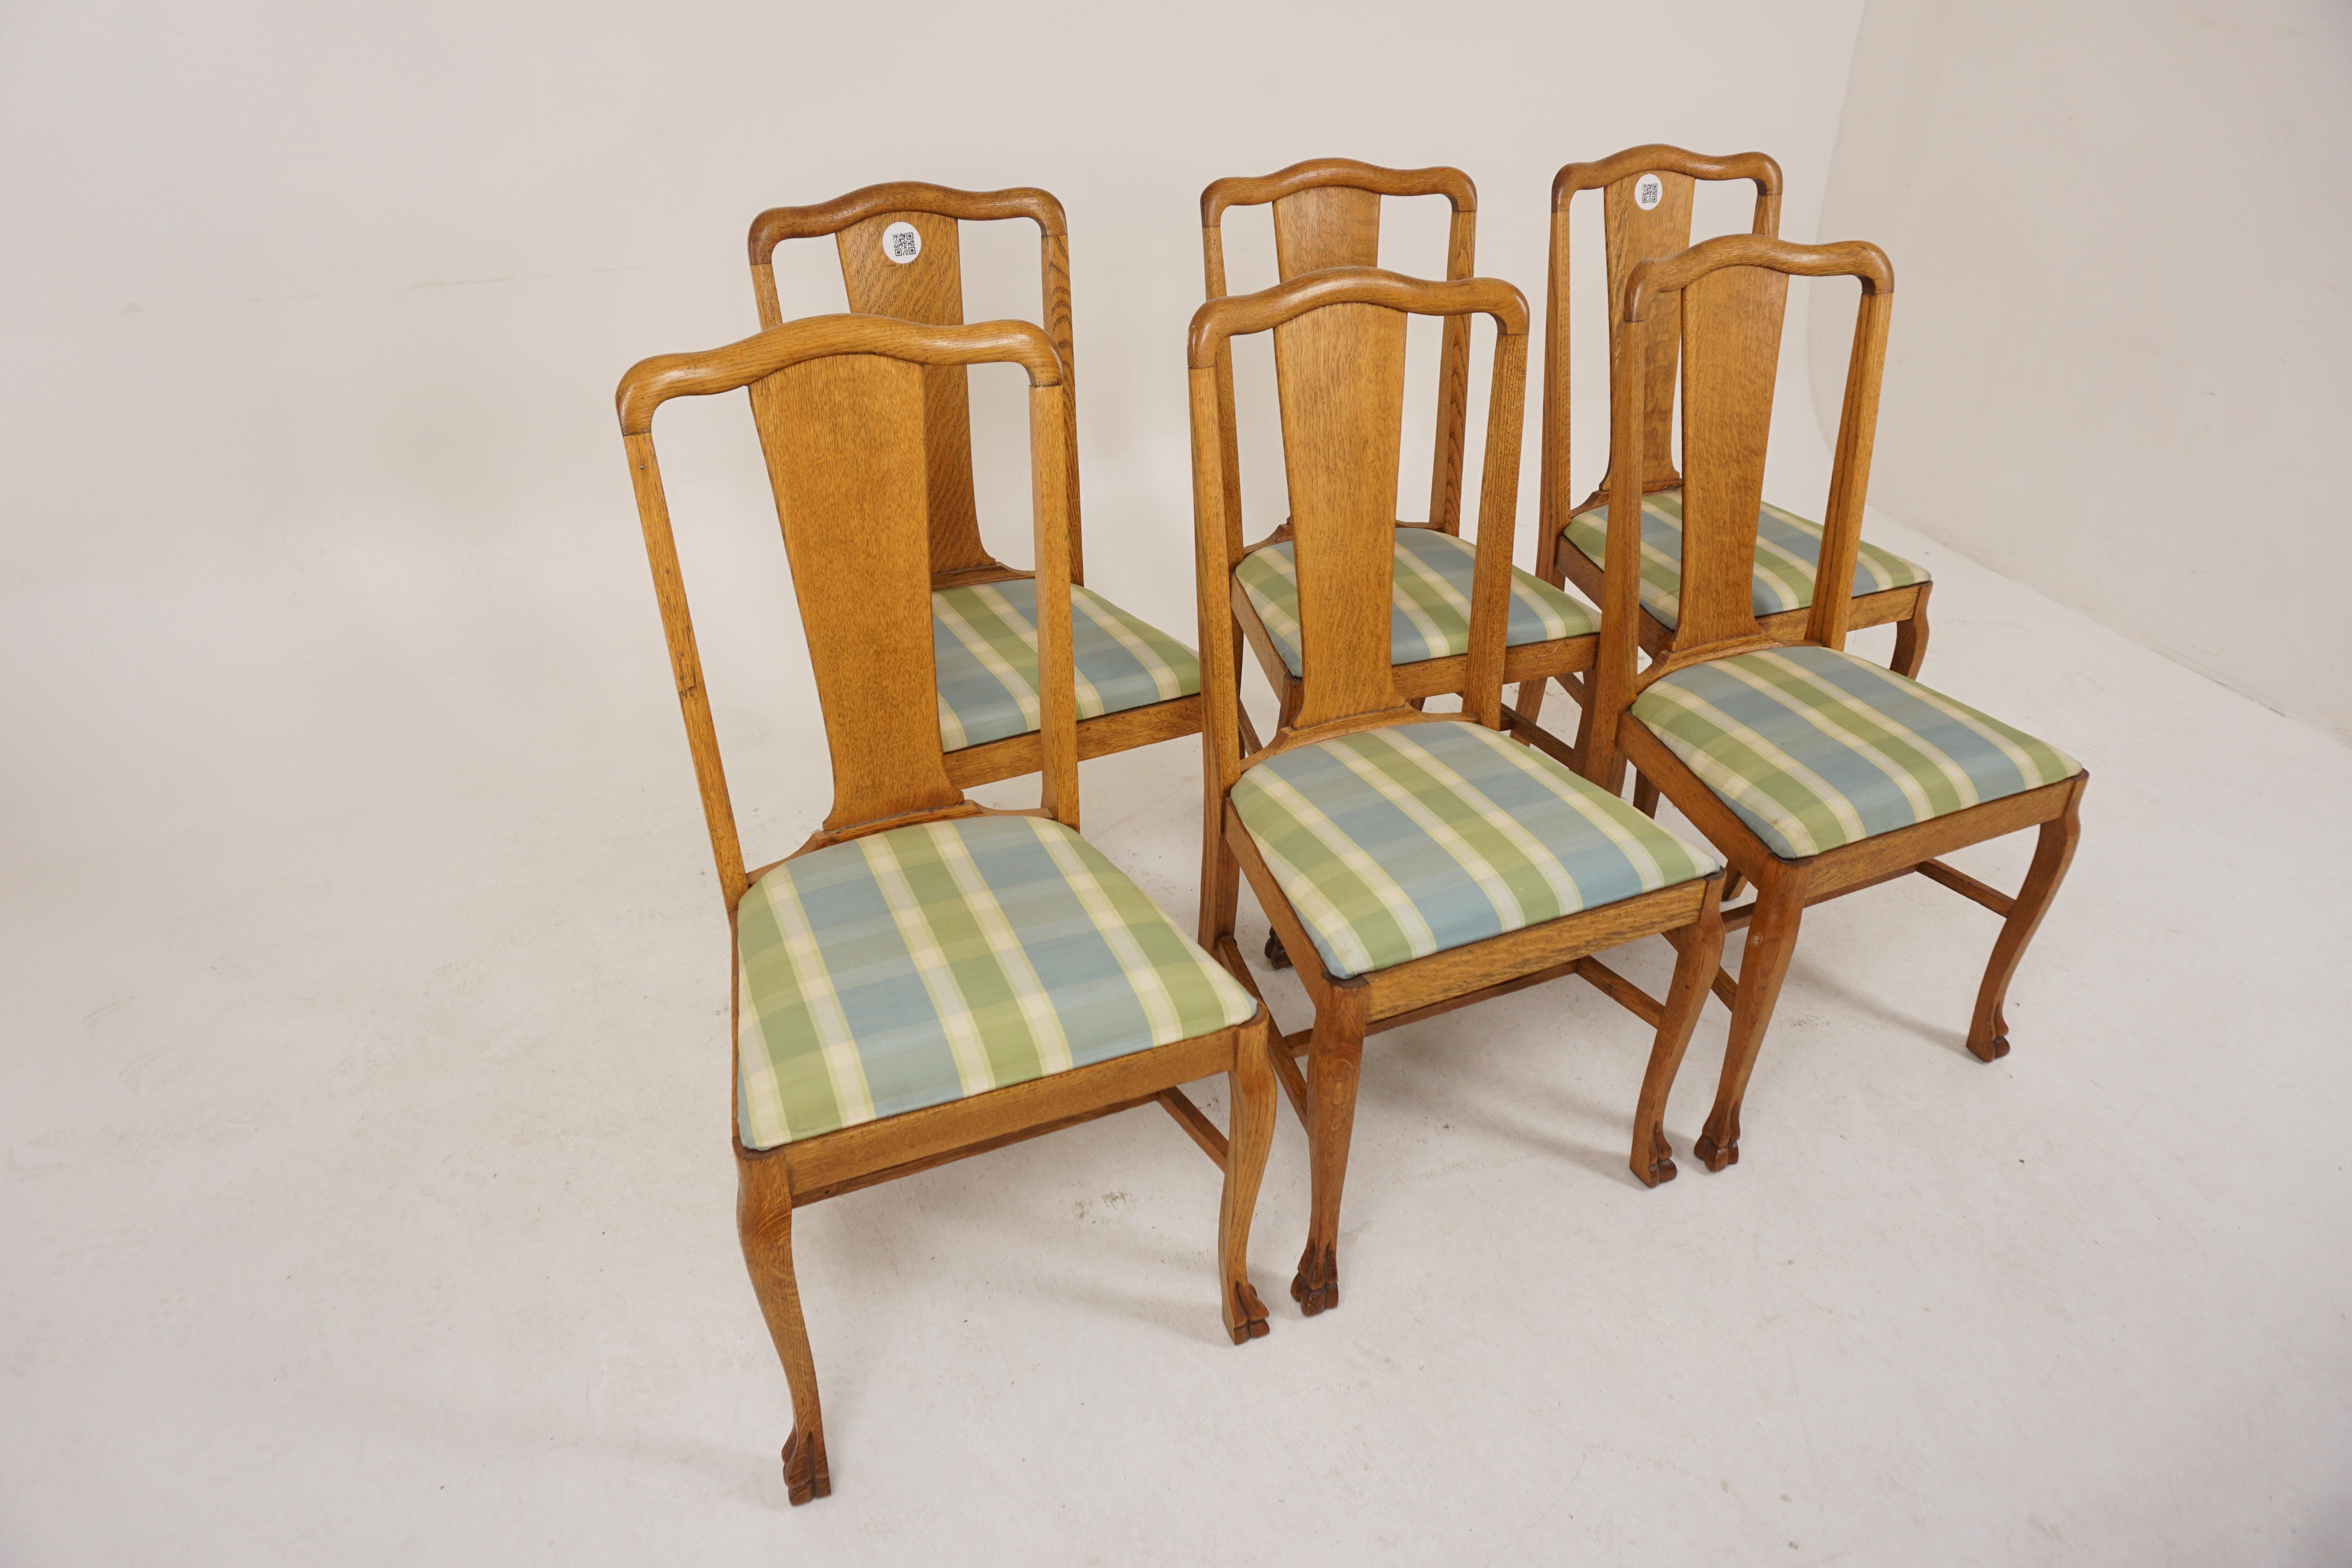 Set Of 6 Tiger Oak T Back Dining Chairs, Lift Out Upholstered Seat, America 1920, H515

Solid Oak
Original finish
Shaped top rail
Wide tiger oak slat on the back
Upholstered seat that is screwed down the the frame
Stands on 2 front shaped legs with